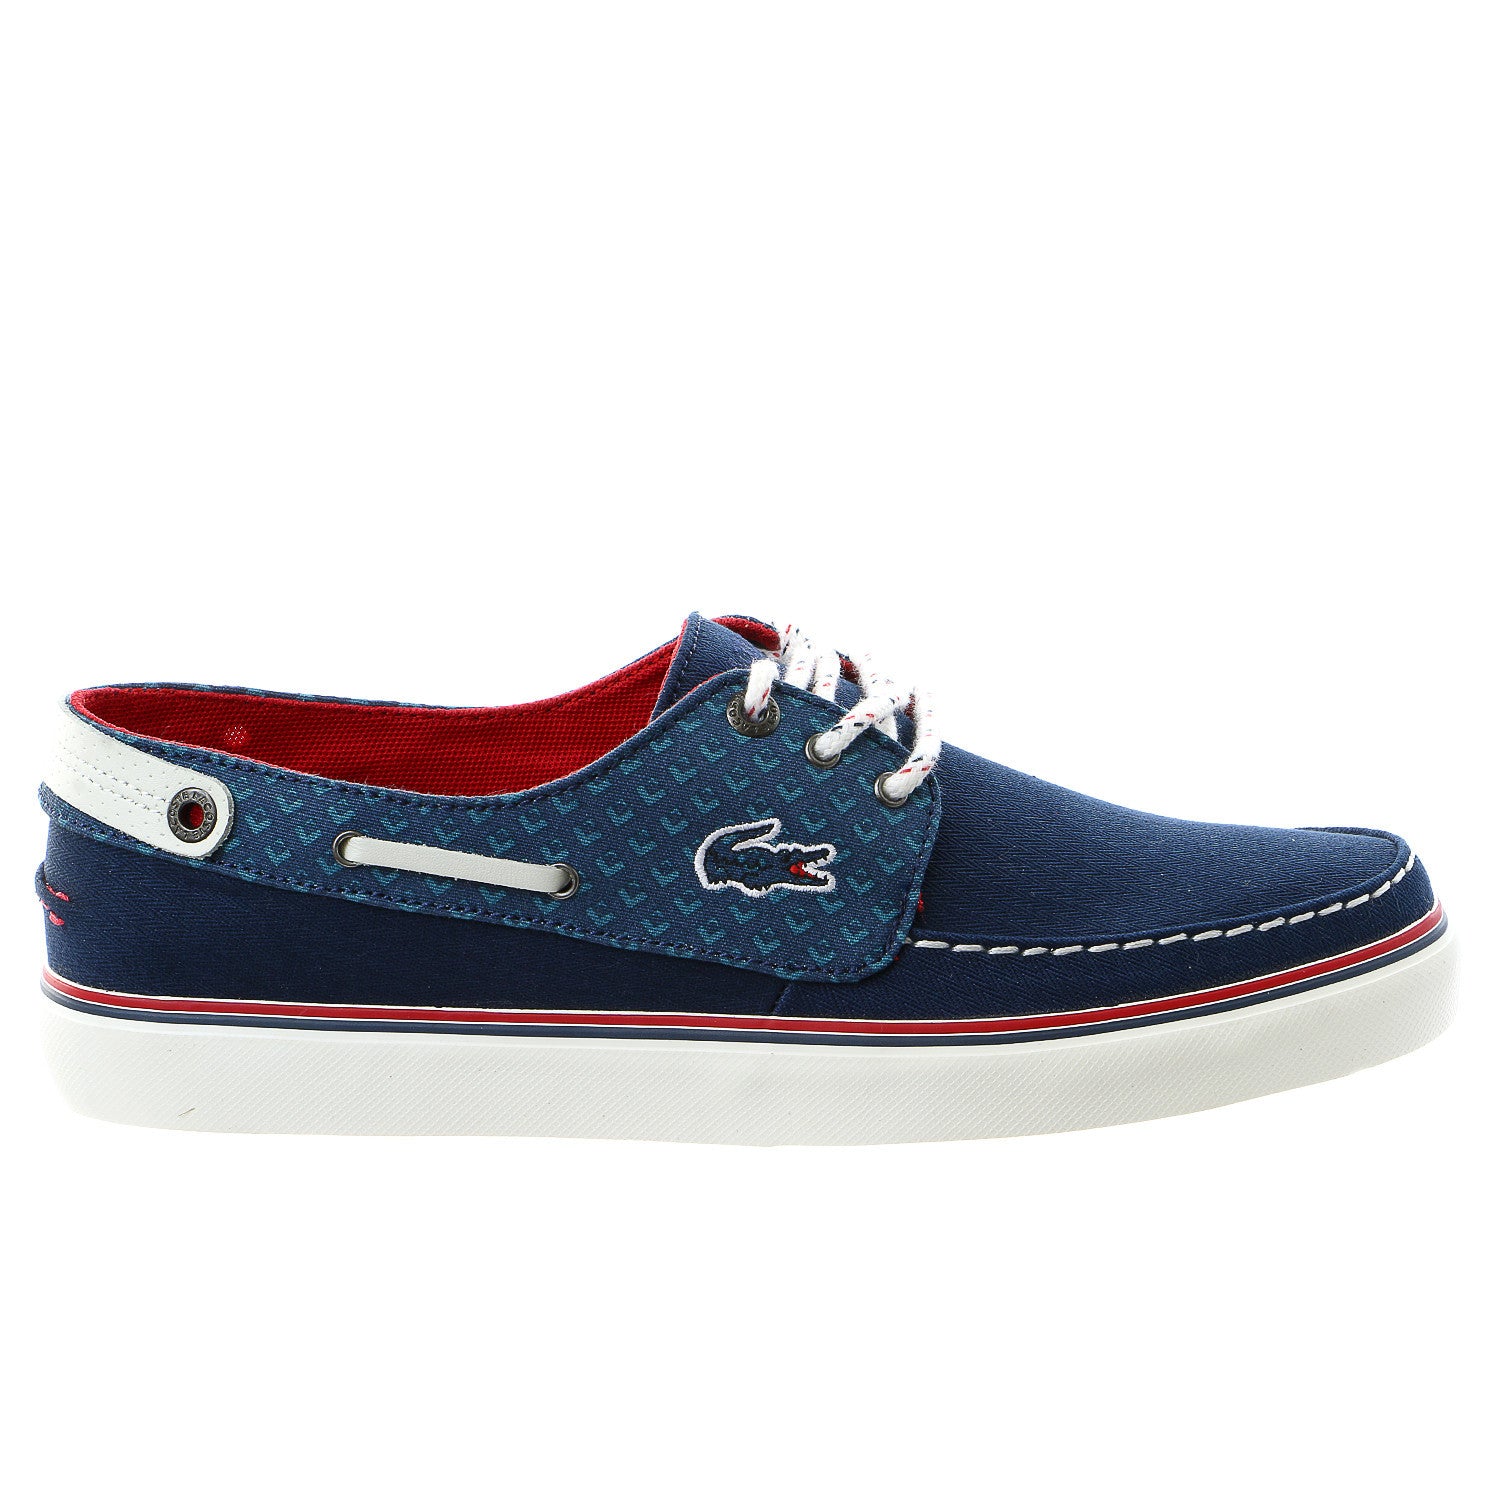 lacoste boat shoes brown